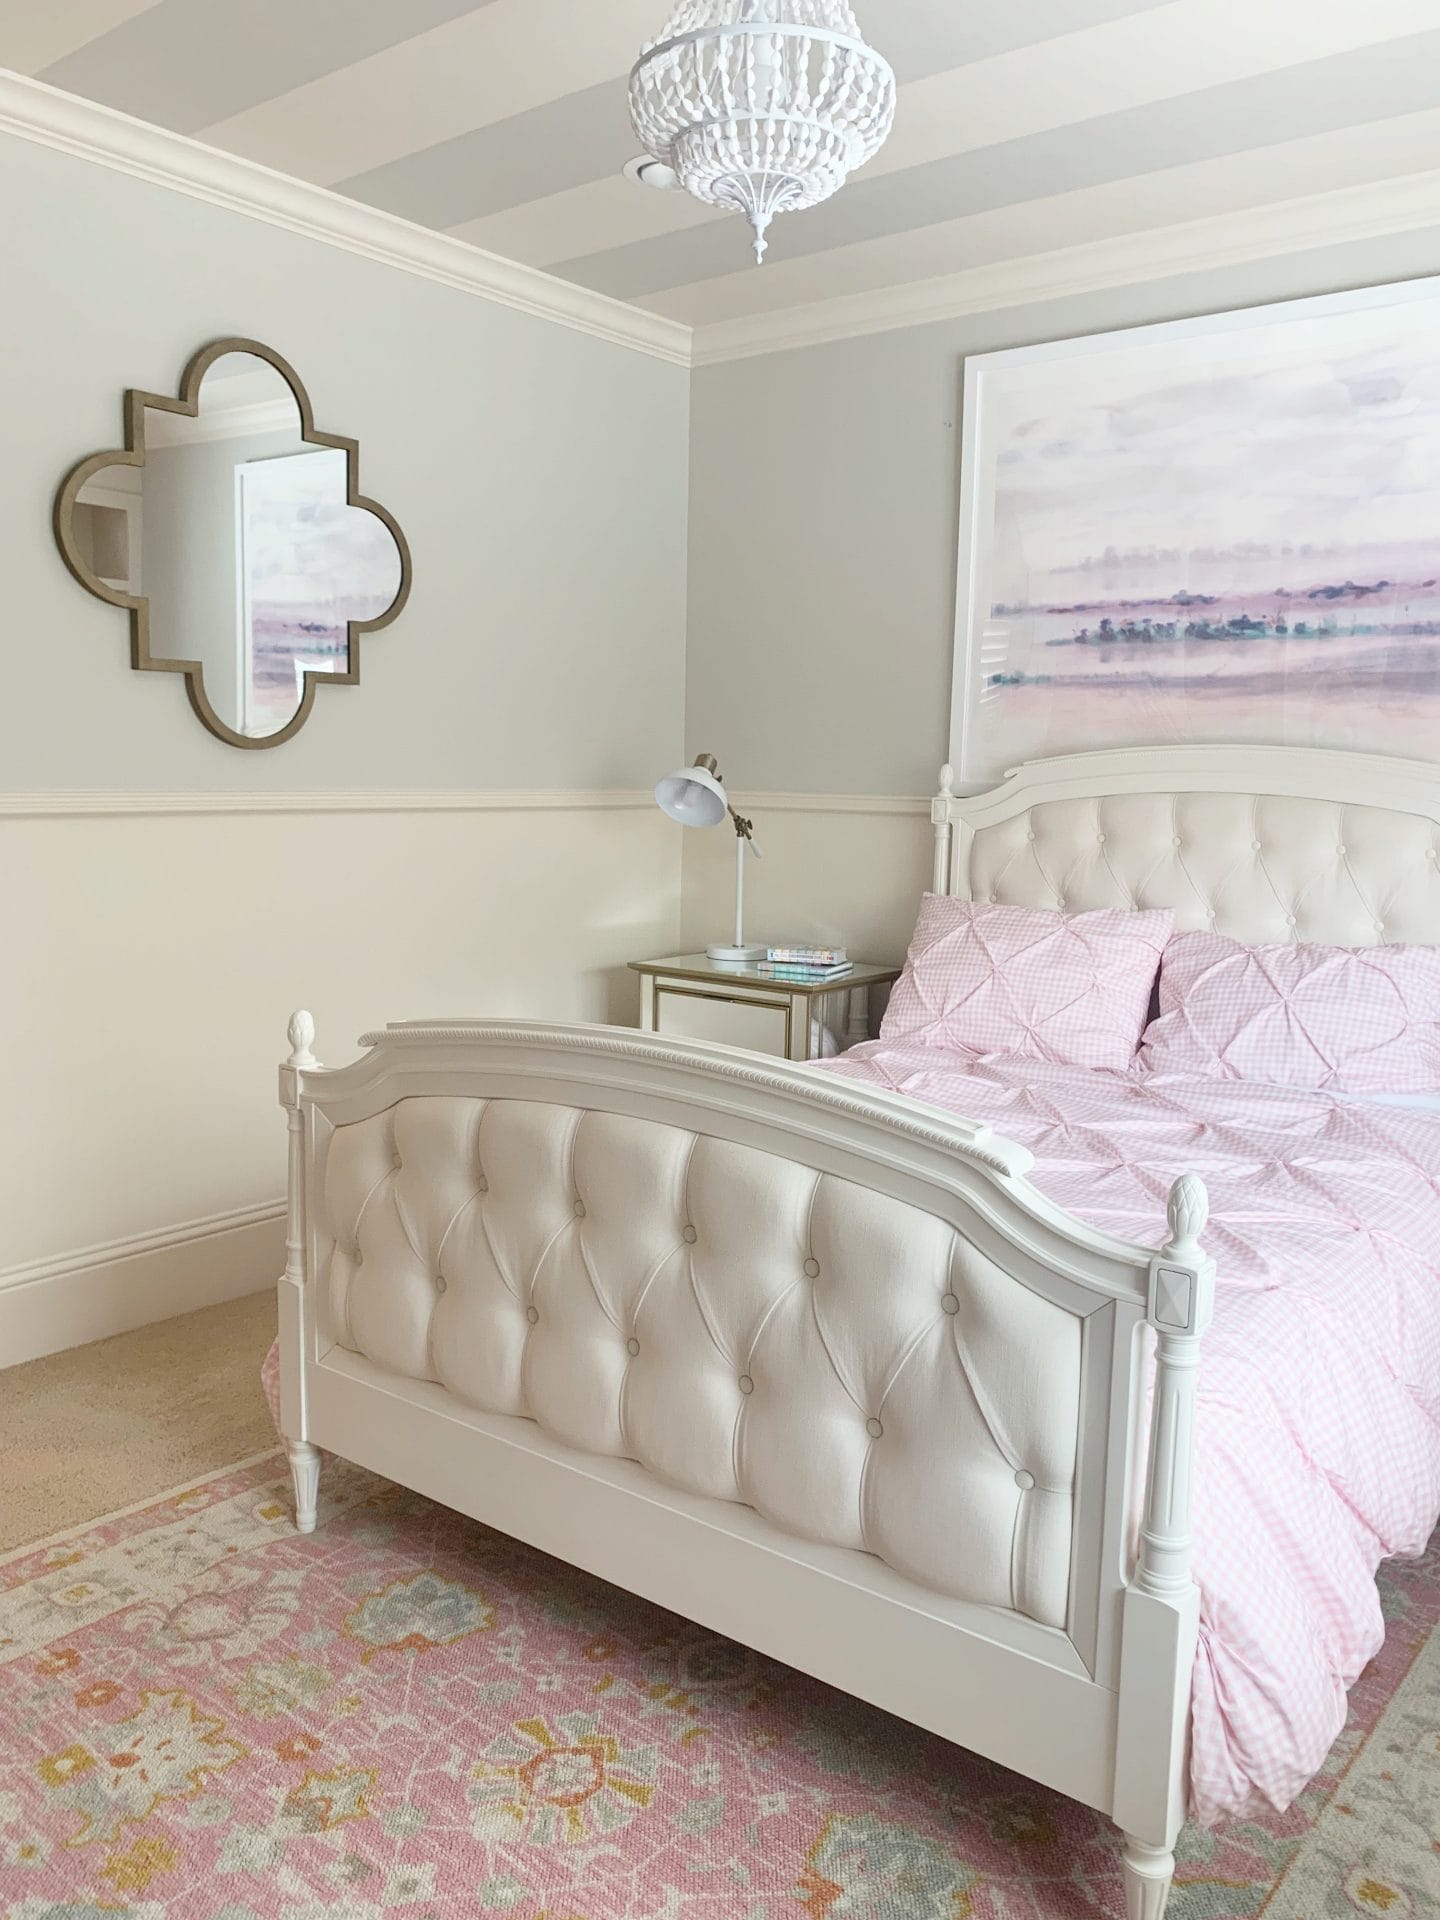 Little Girl's Room Pottery Barn Bed and Pink Rug